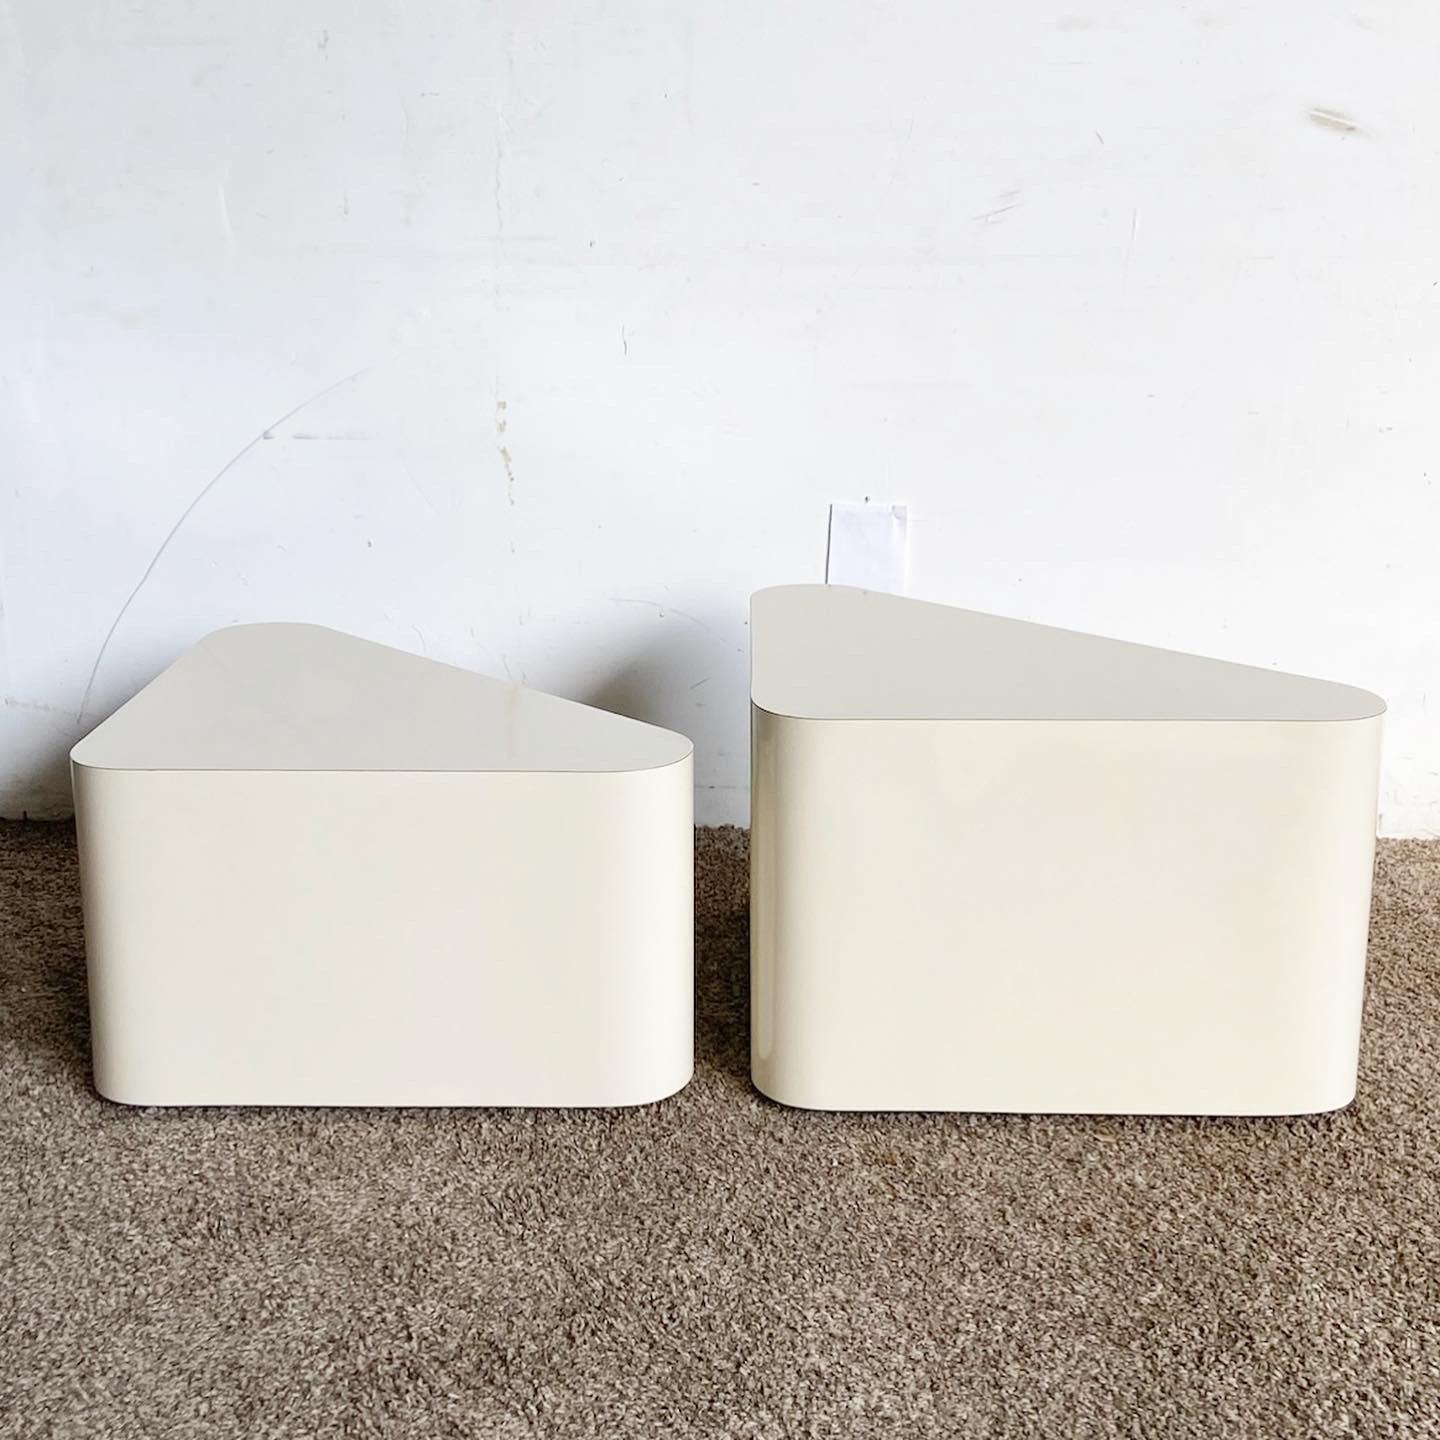 Late 20th Century Postmodern Cream Lacquer Laminate Triangular Nesting Side Tables For Sale